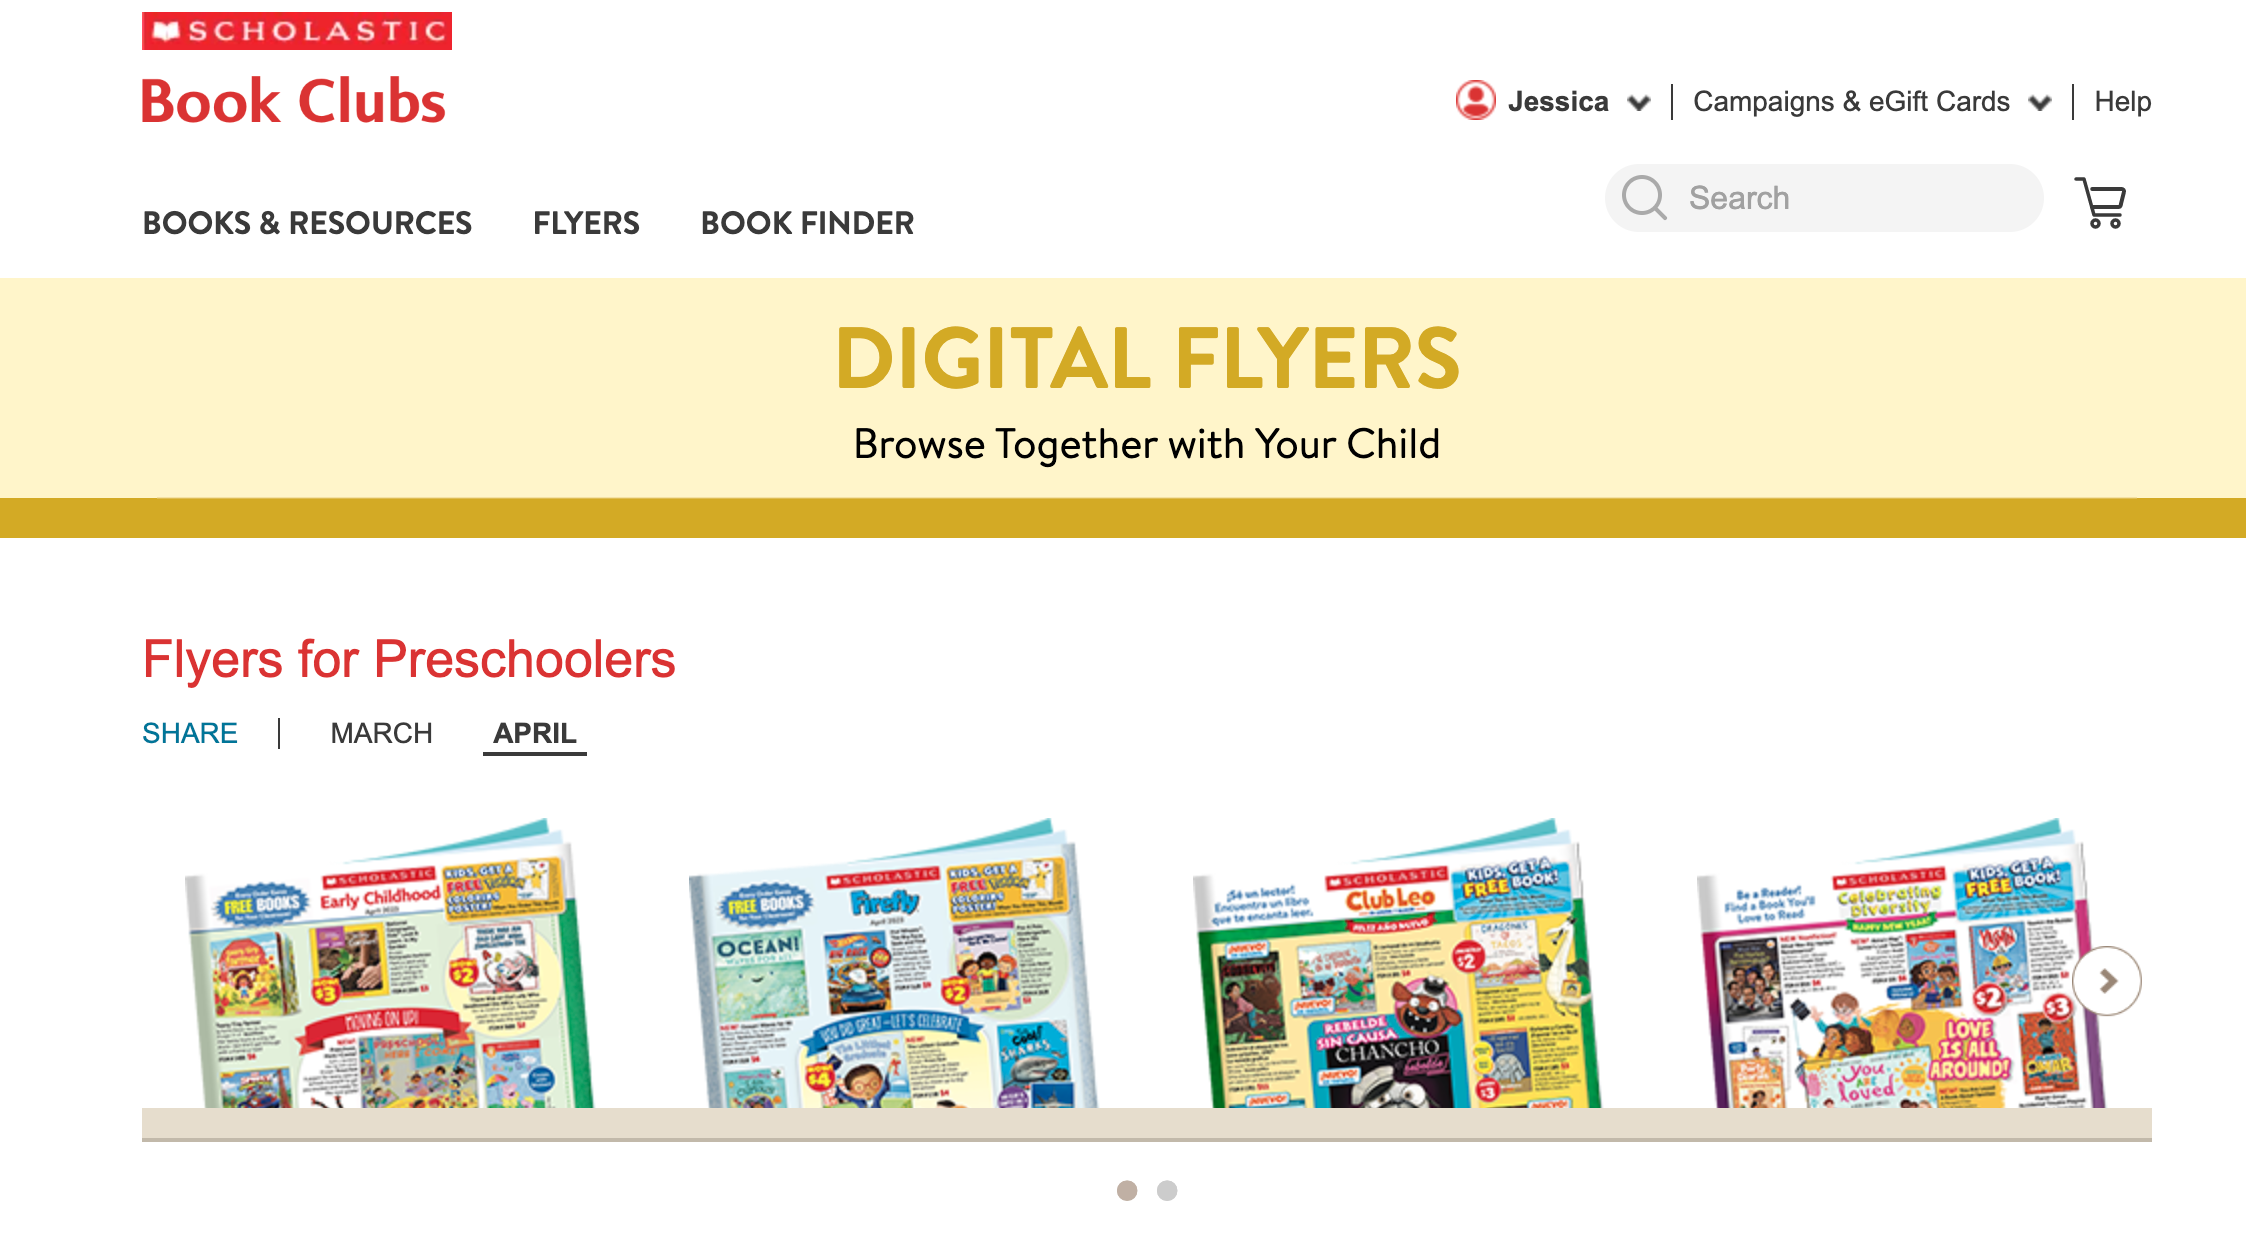 Getting the Most Out of Scholastic Book Orders